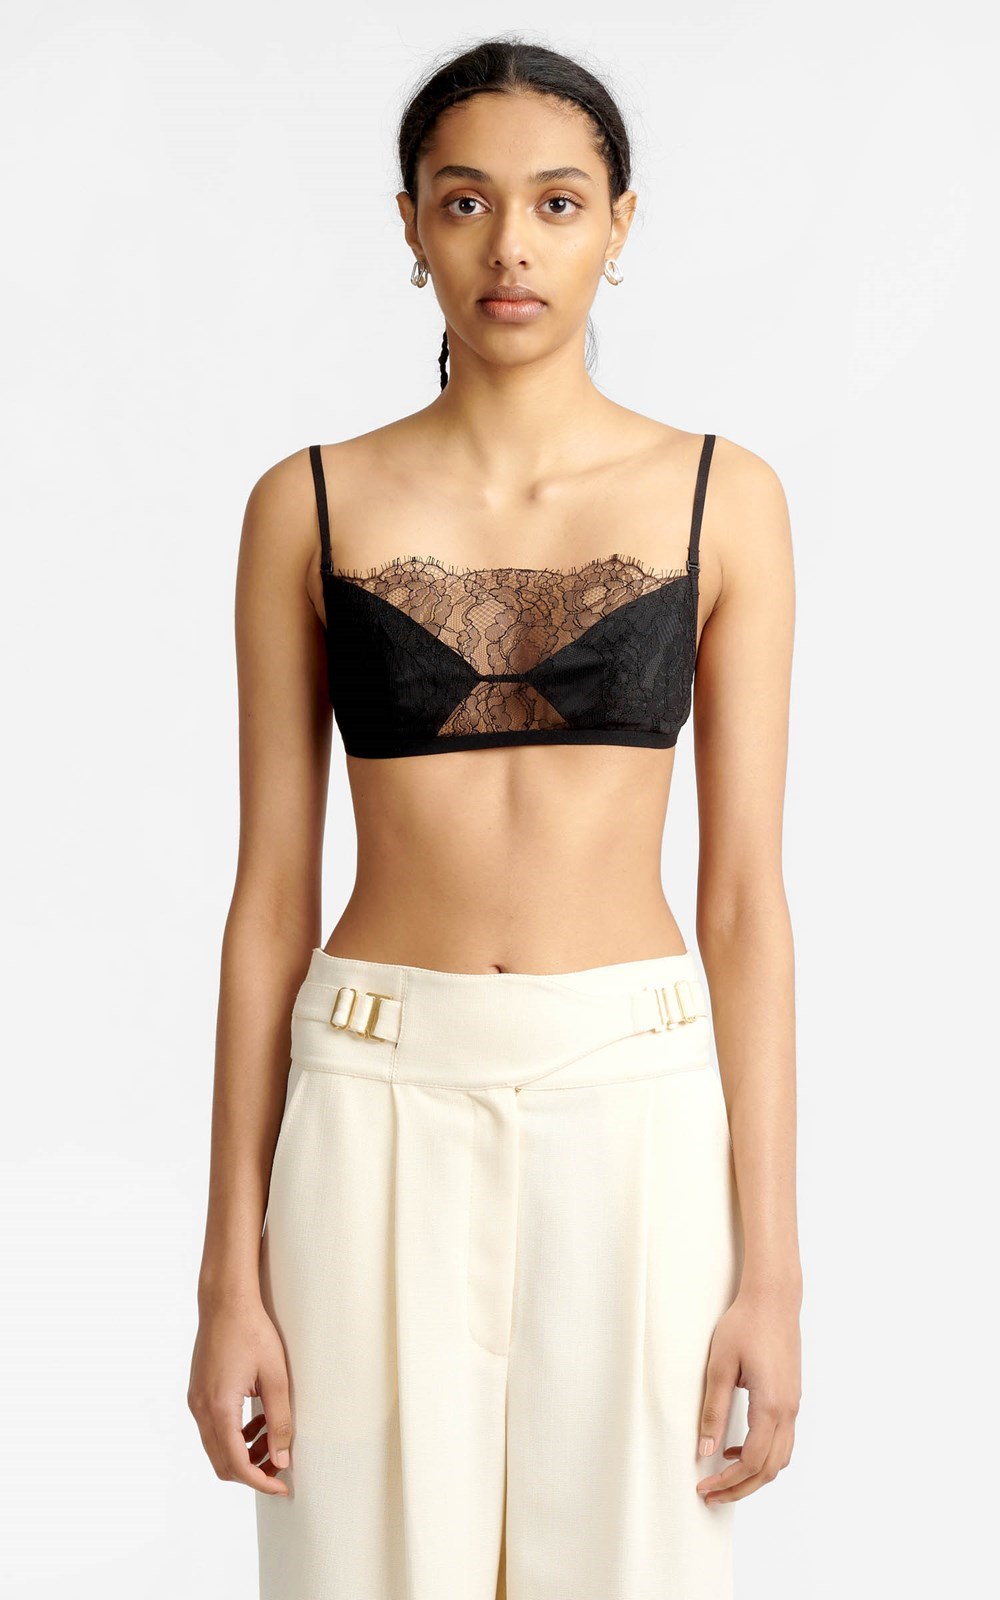 TRACE LACE BANDEAU by Dion Lee